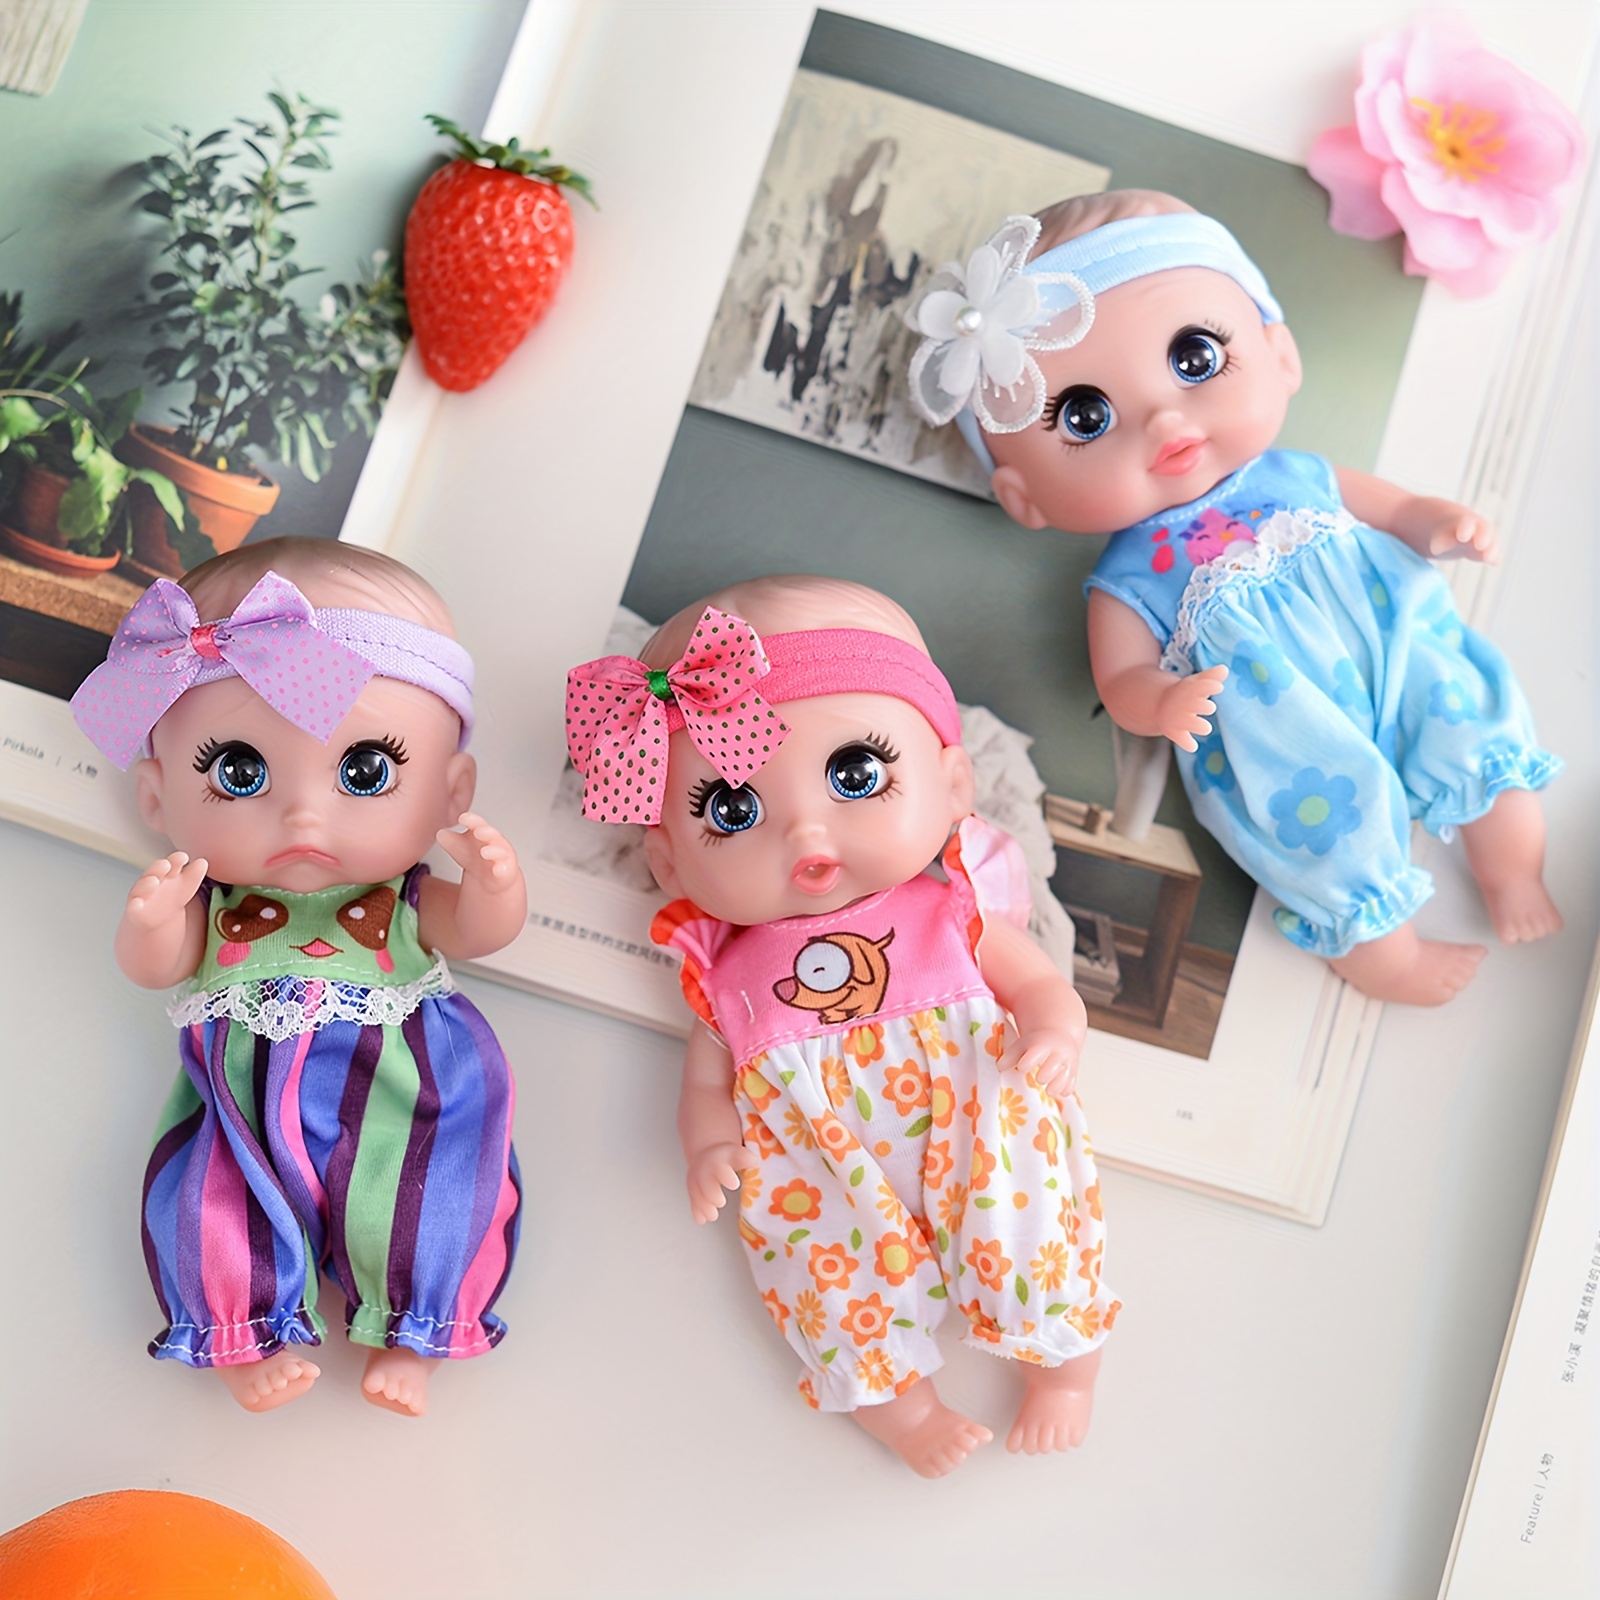 

6" Cute Small Baby Doll Newborn Baby All Vinyl Reborn Baby Dolls For Girls Swivel Mini Dolls 16 Cm Crying Baby Doll Diy Toys For Ages 3+